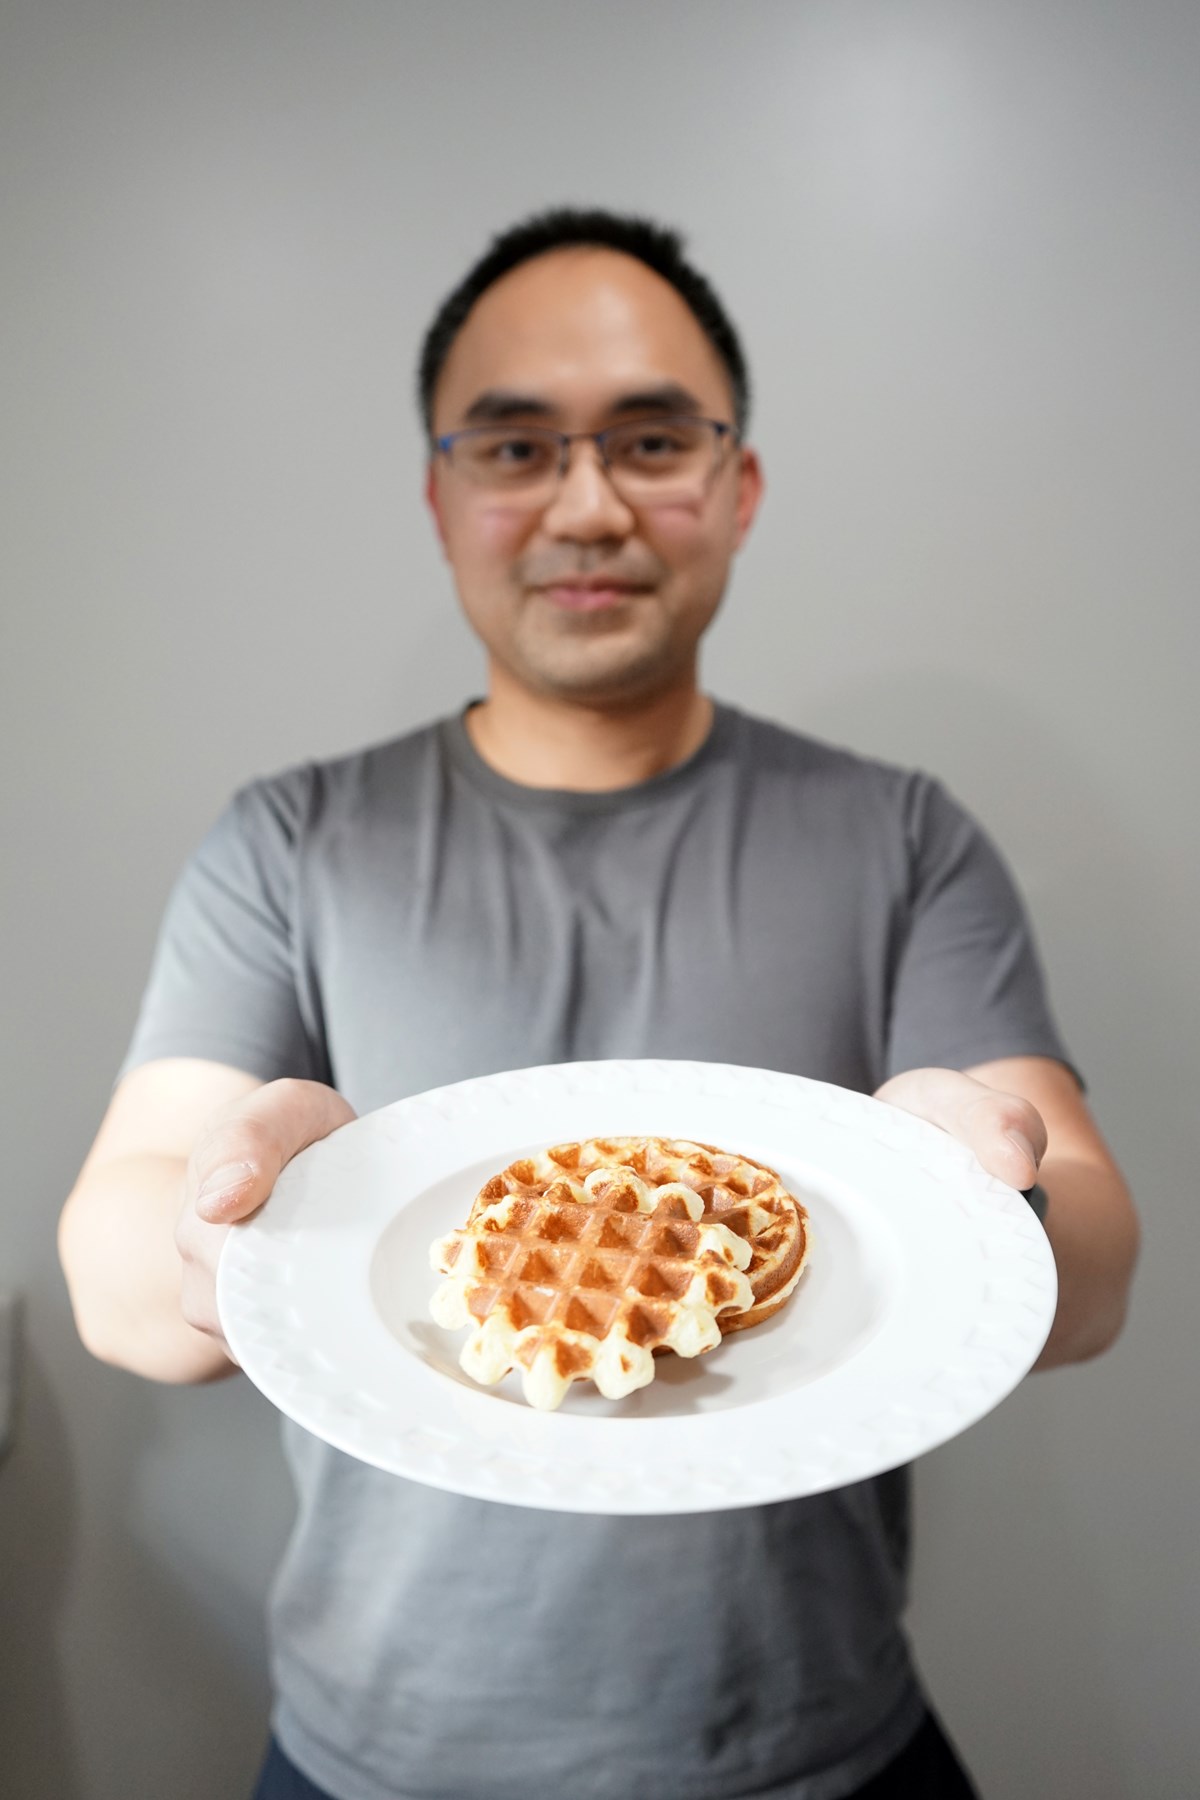 A man in glasses and a grey T-shirt holds a plate with two waffles.